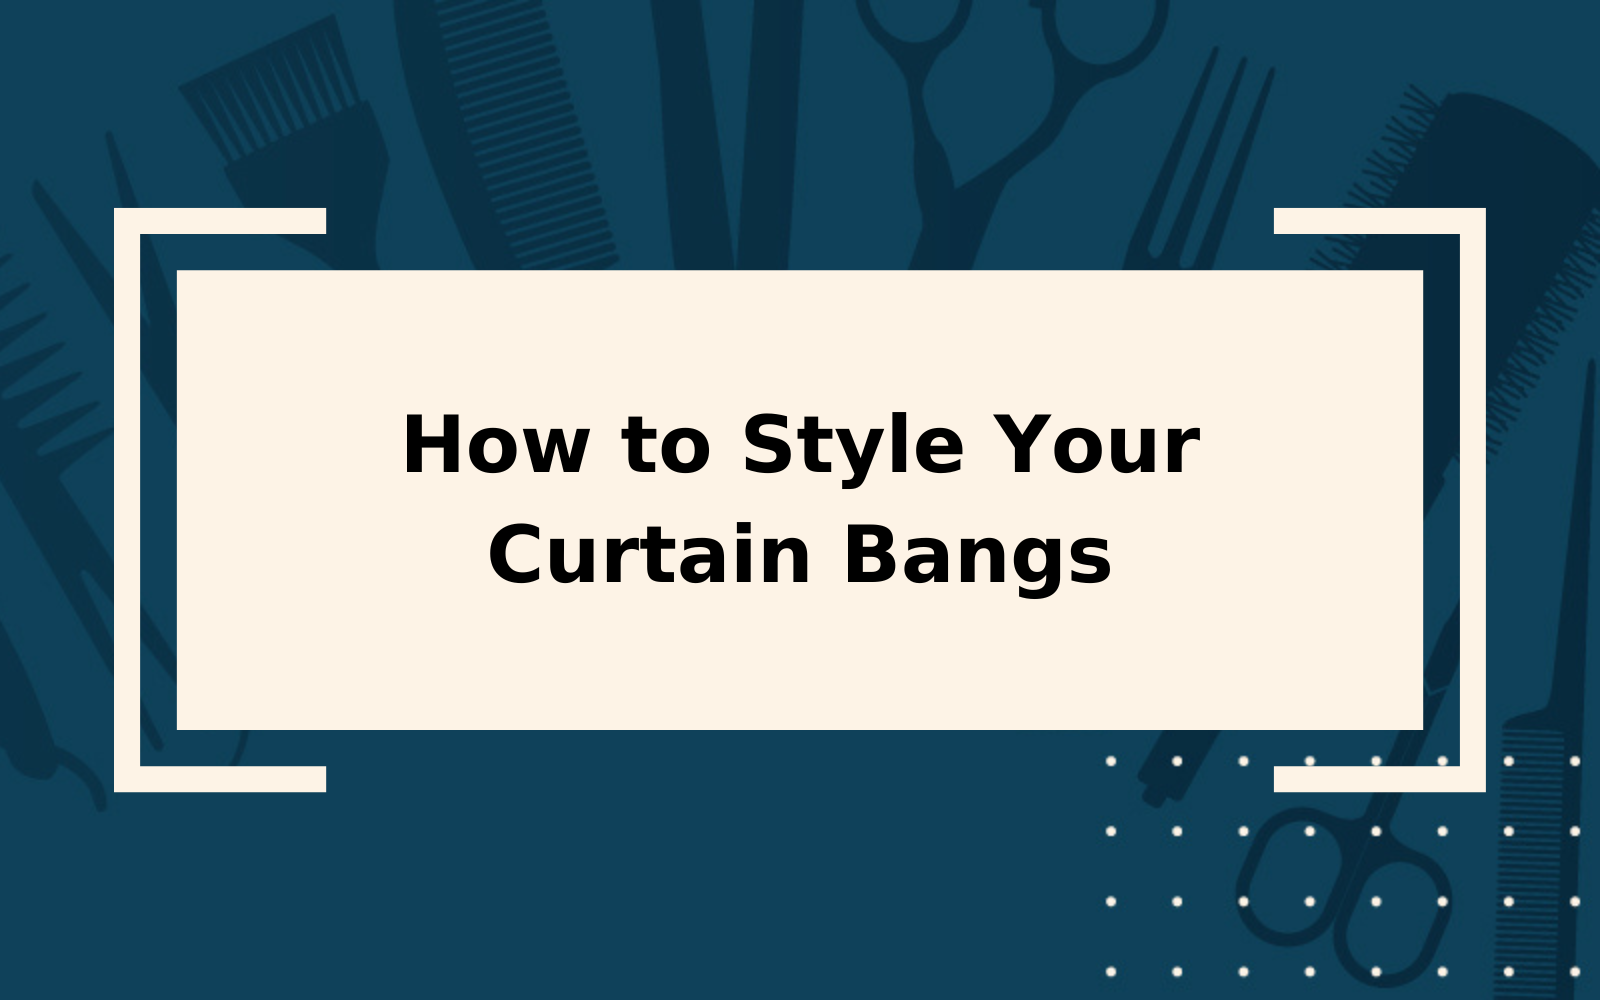 How to Style Curtain Bangs | Step-by-Step Guide